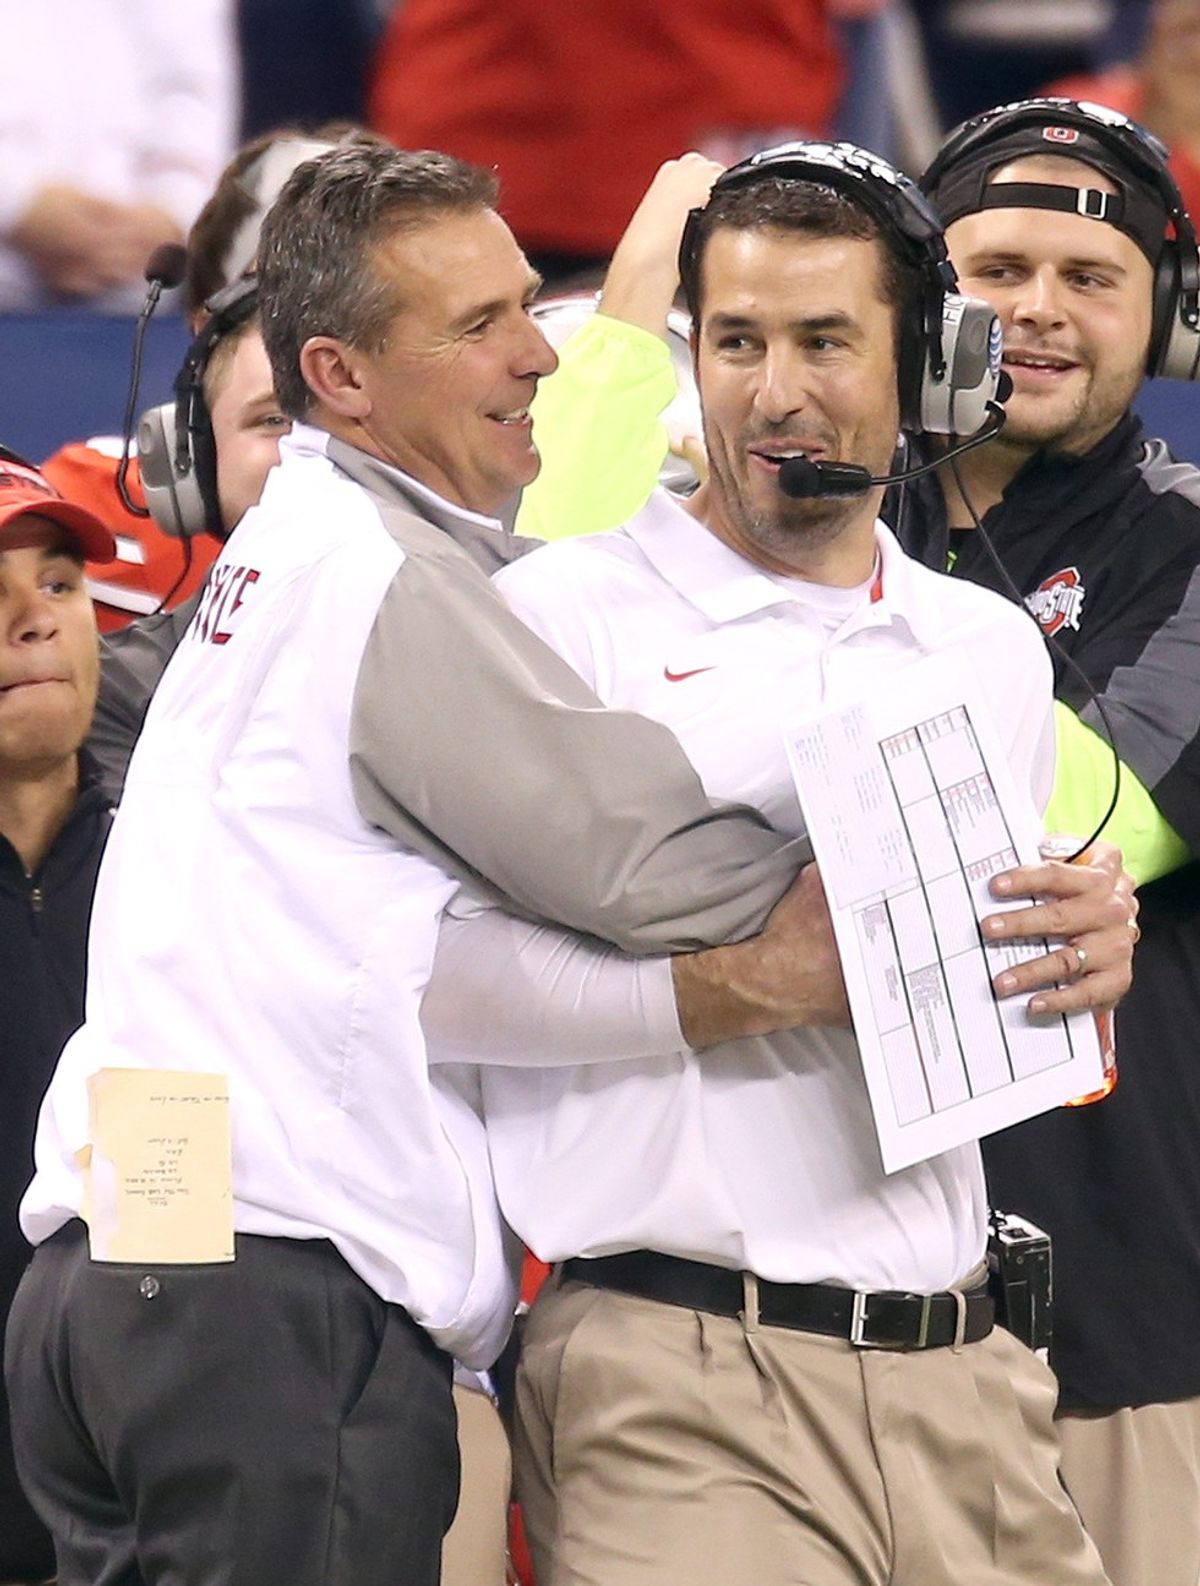 Luke Fickell Is Our New Coach... So What Now?